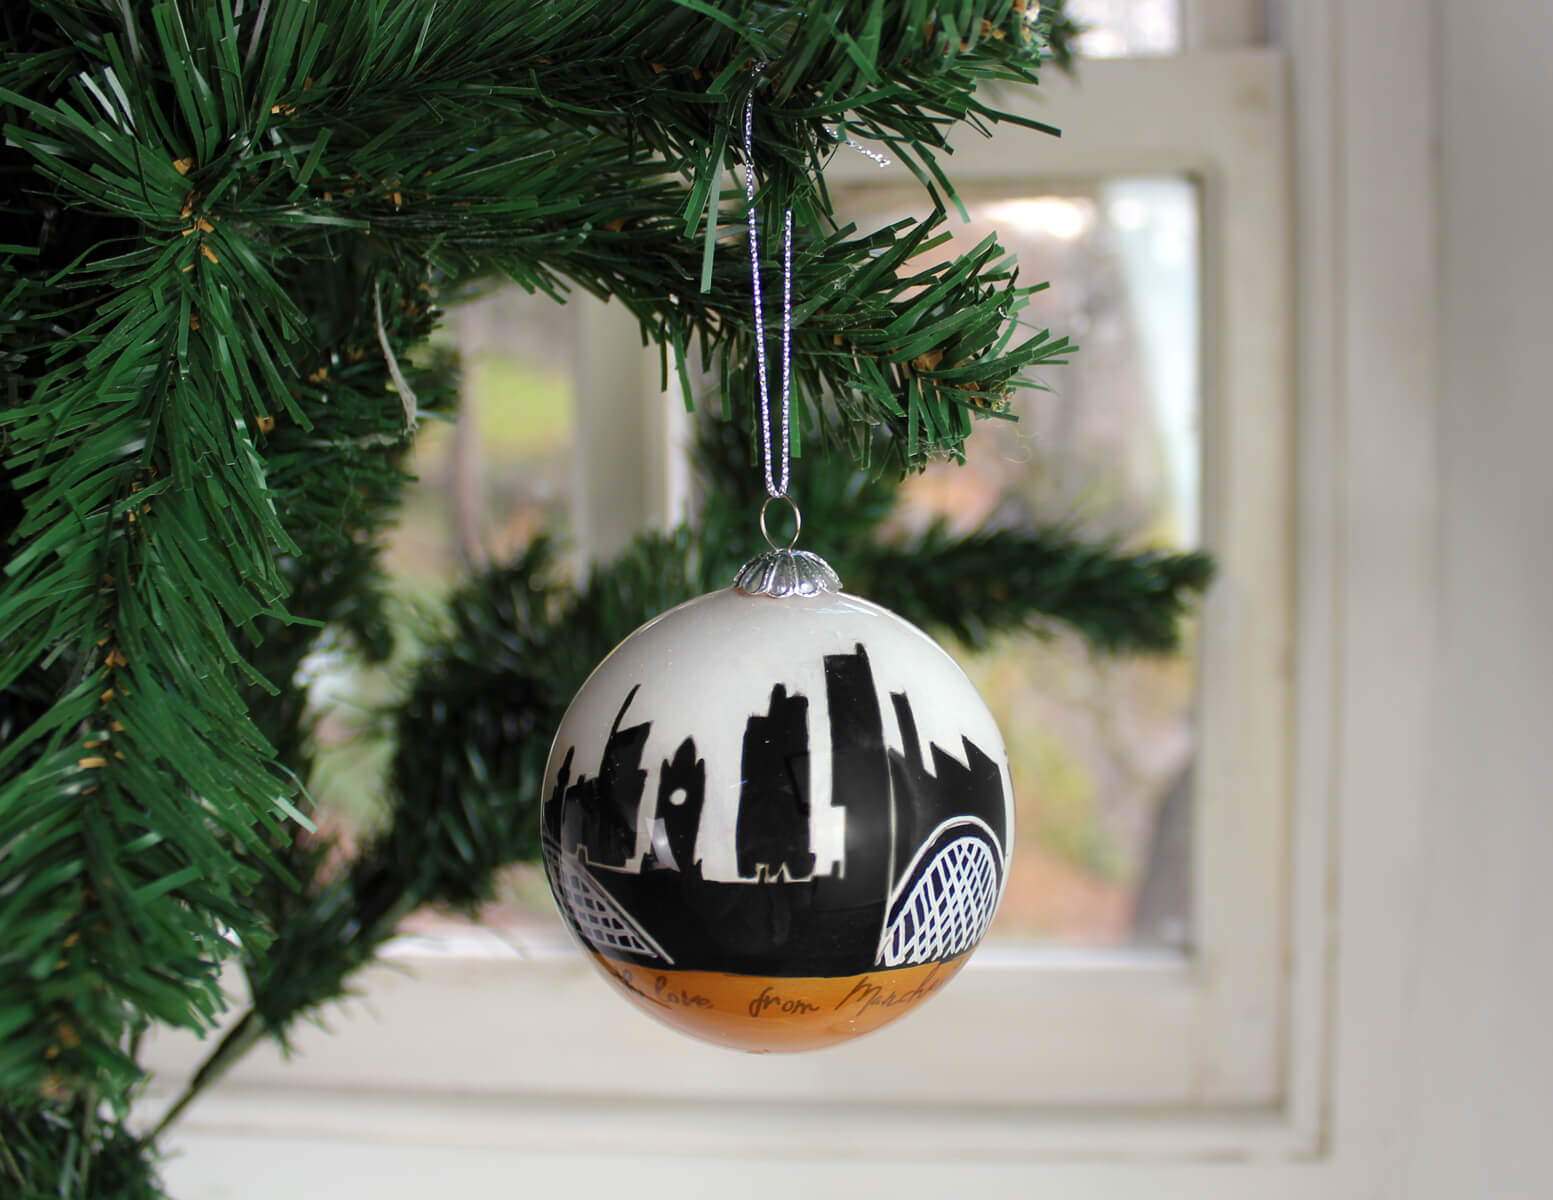 With Love from Manchester Hand-Painted Bauble | The Manchester Shop